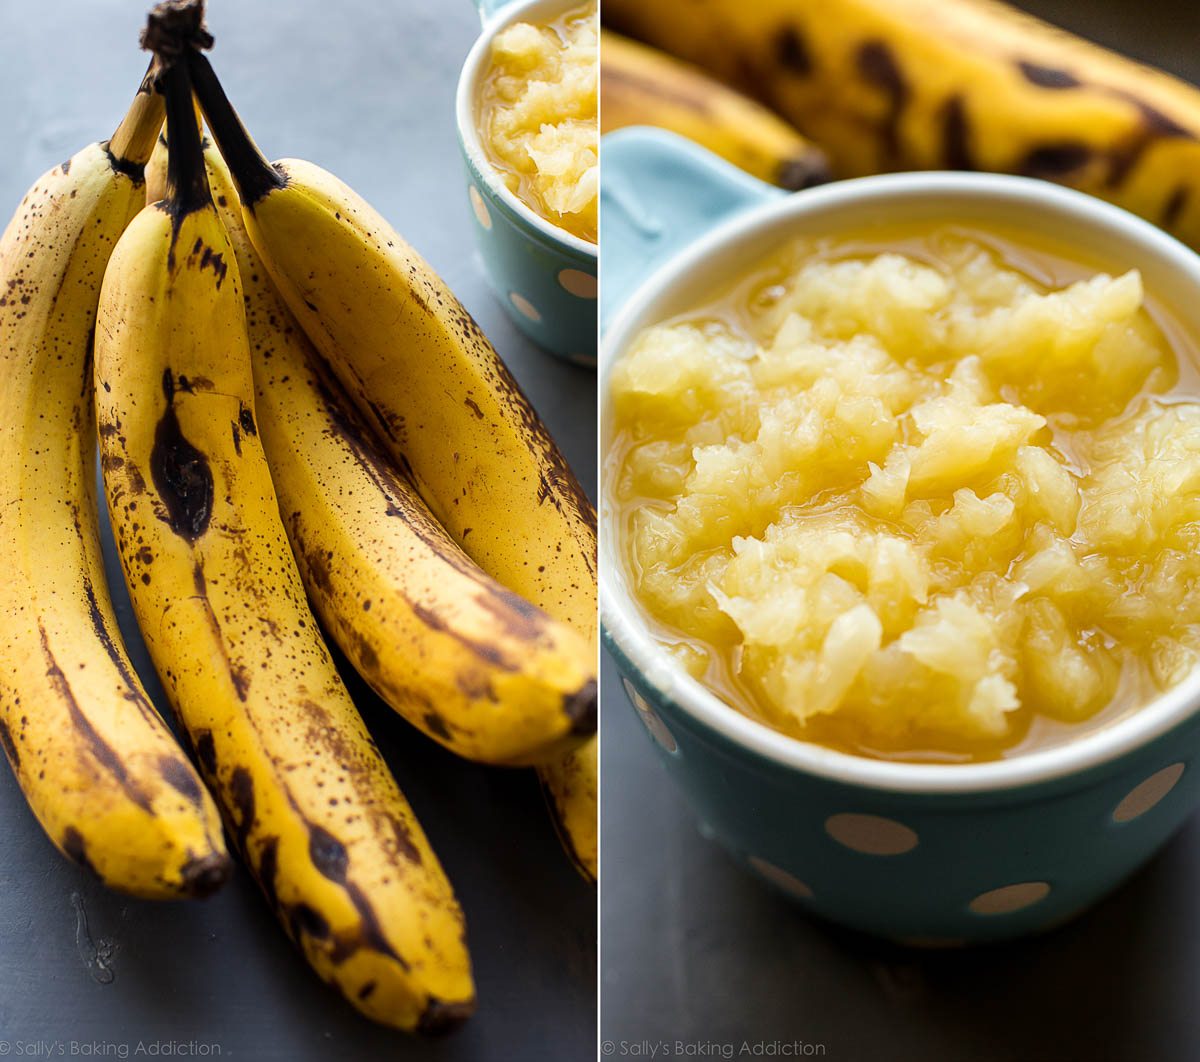 2 images of ripe bananas and crushed pineapples in a measuring cup